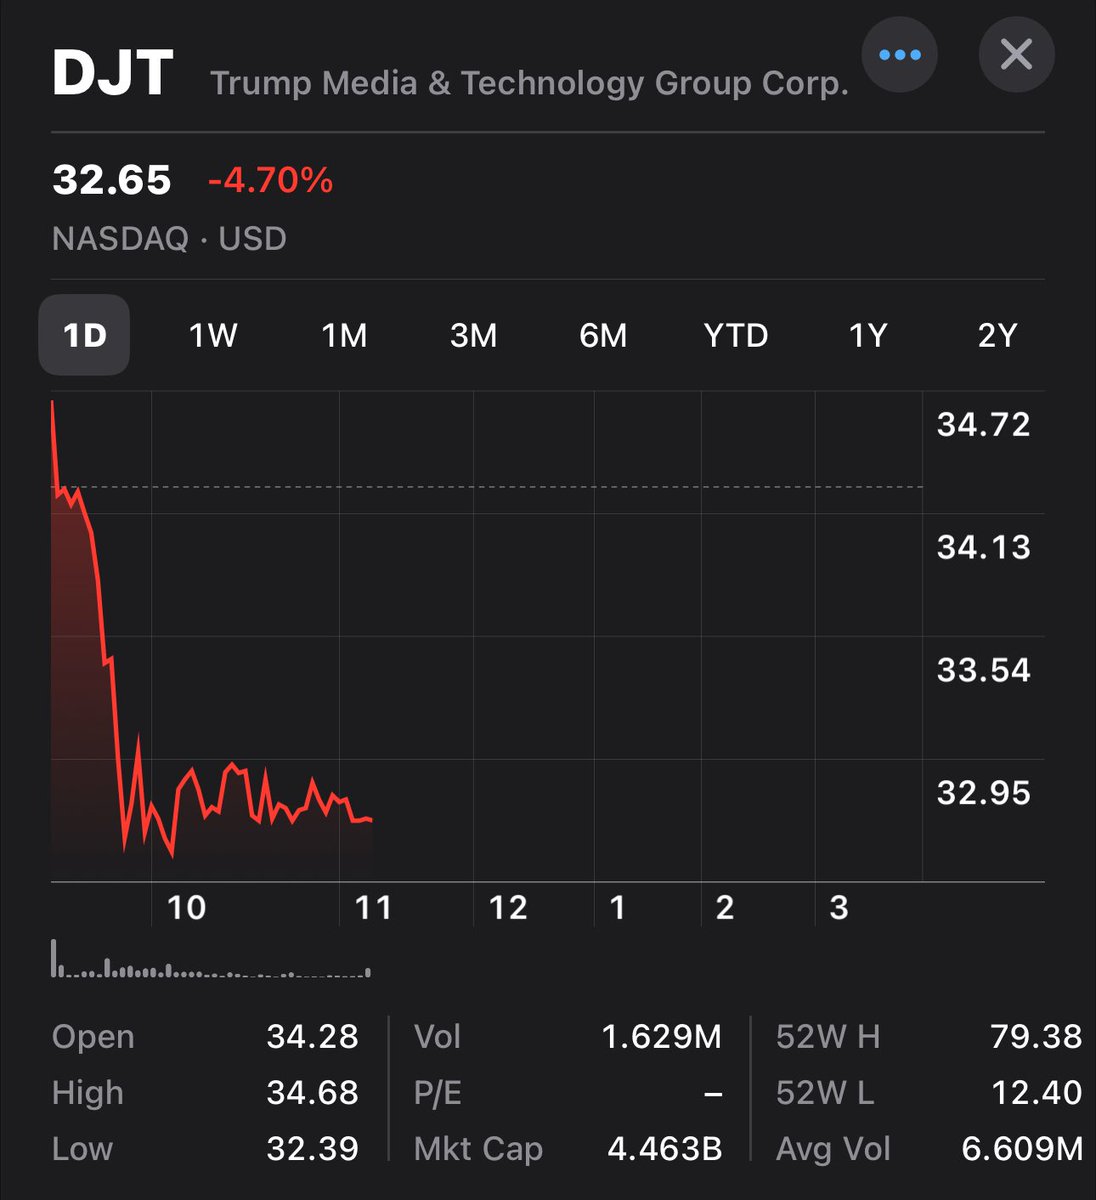 It’s a day of the week which means DJT continues its downward descent.